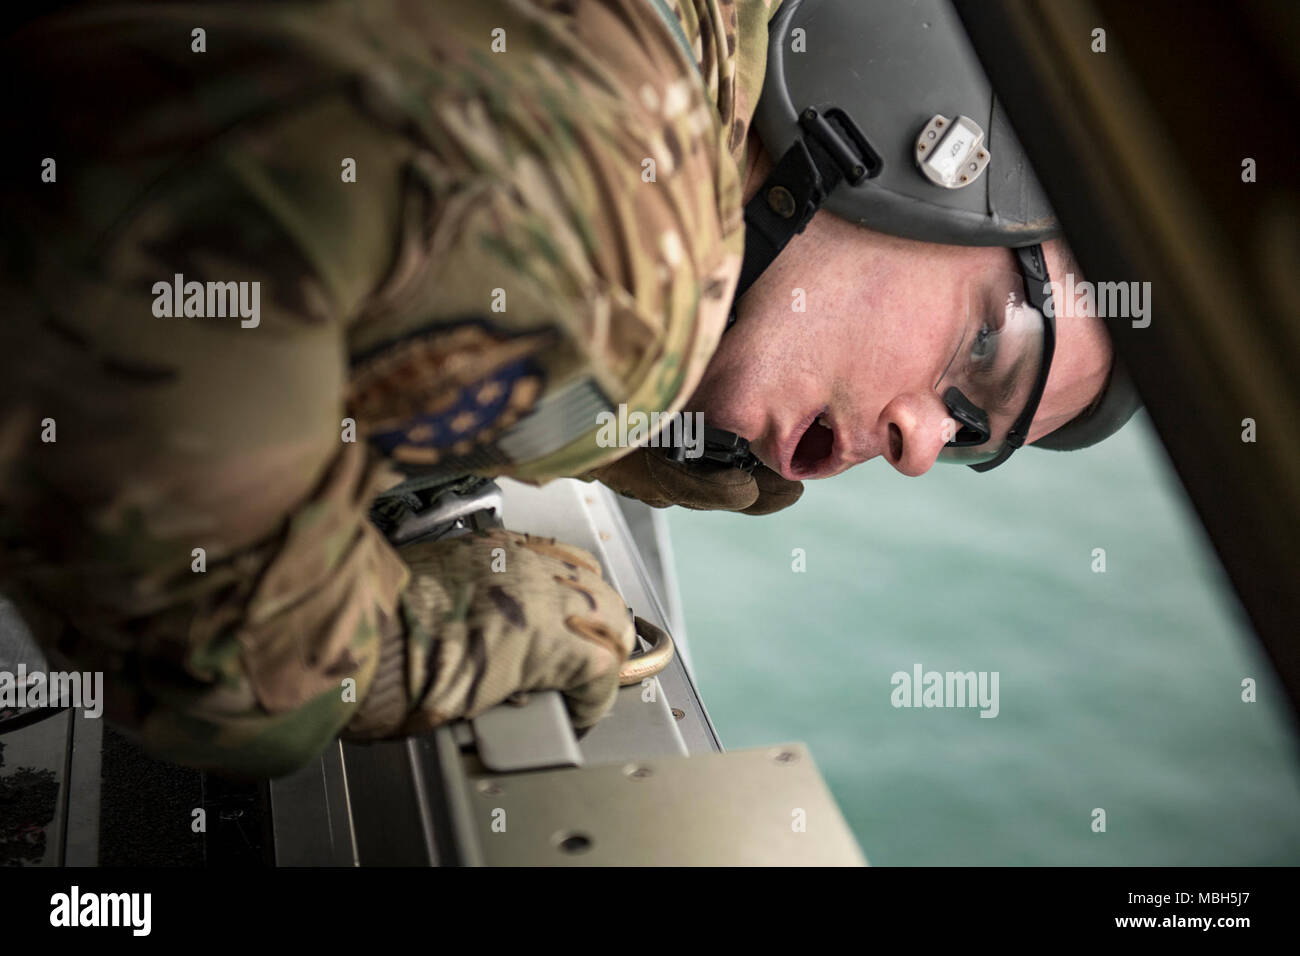 Staff Sgt. James Baker, 71st Rescue Squadron loadmaster, scans the waters below during pyrotechnic employment training, March 30, 2018, in the skies over the Gulf of Mexico. The 71st RQS utilizes various pyrotechnics and sea-dye to assist in over-water rescue efforts. Stock Photo